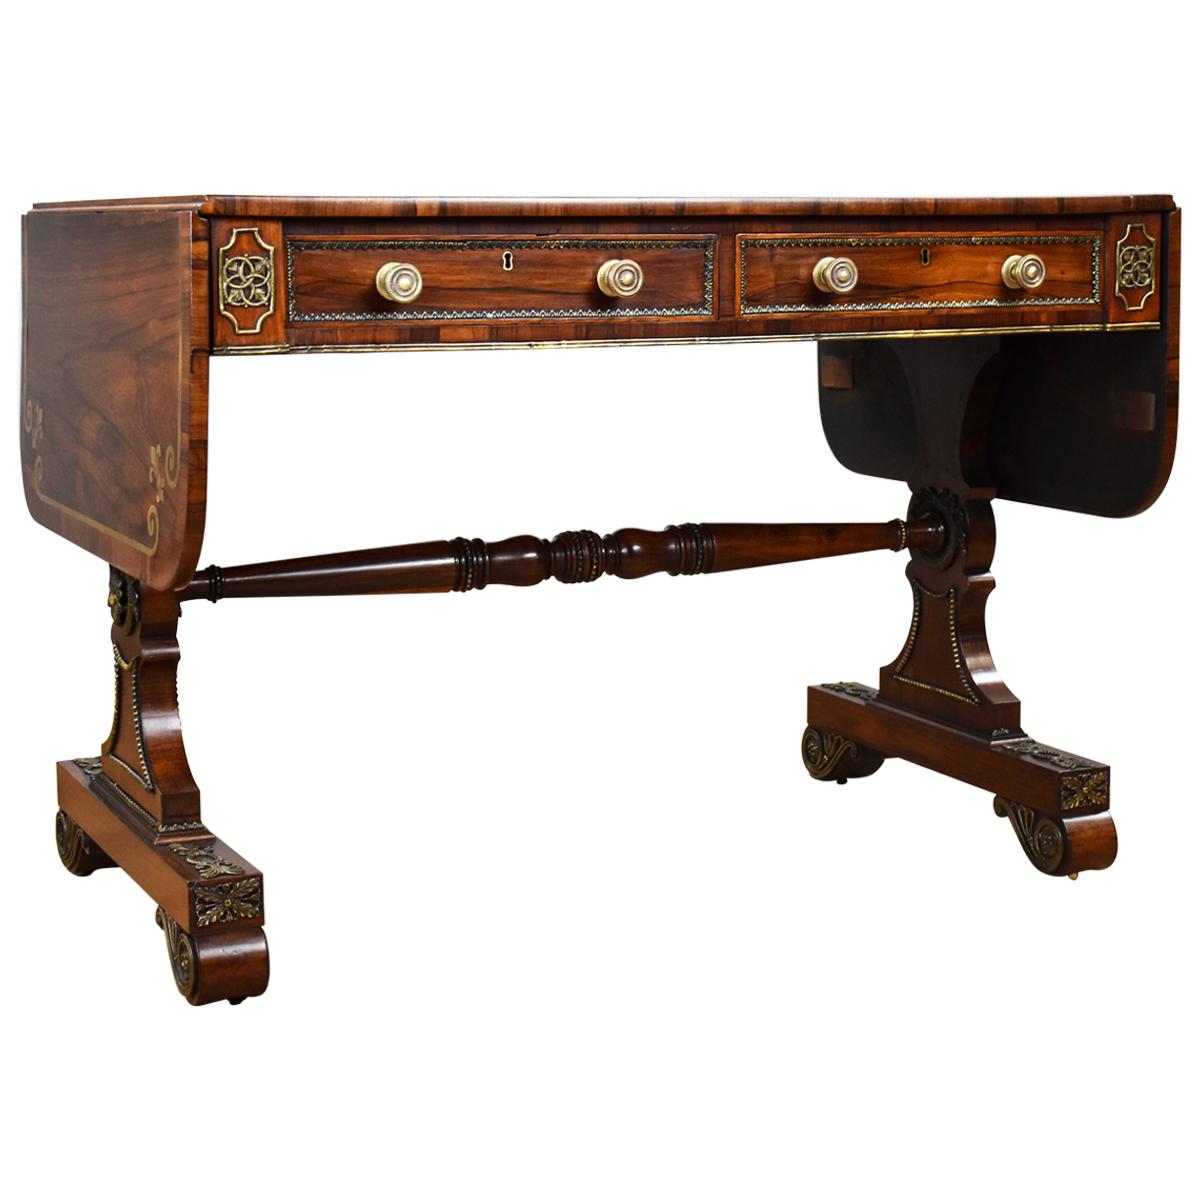 19th Century English Regency Period Rosewood and Brass Inlaid Sofa Table